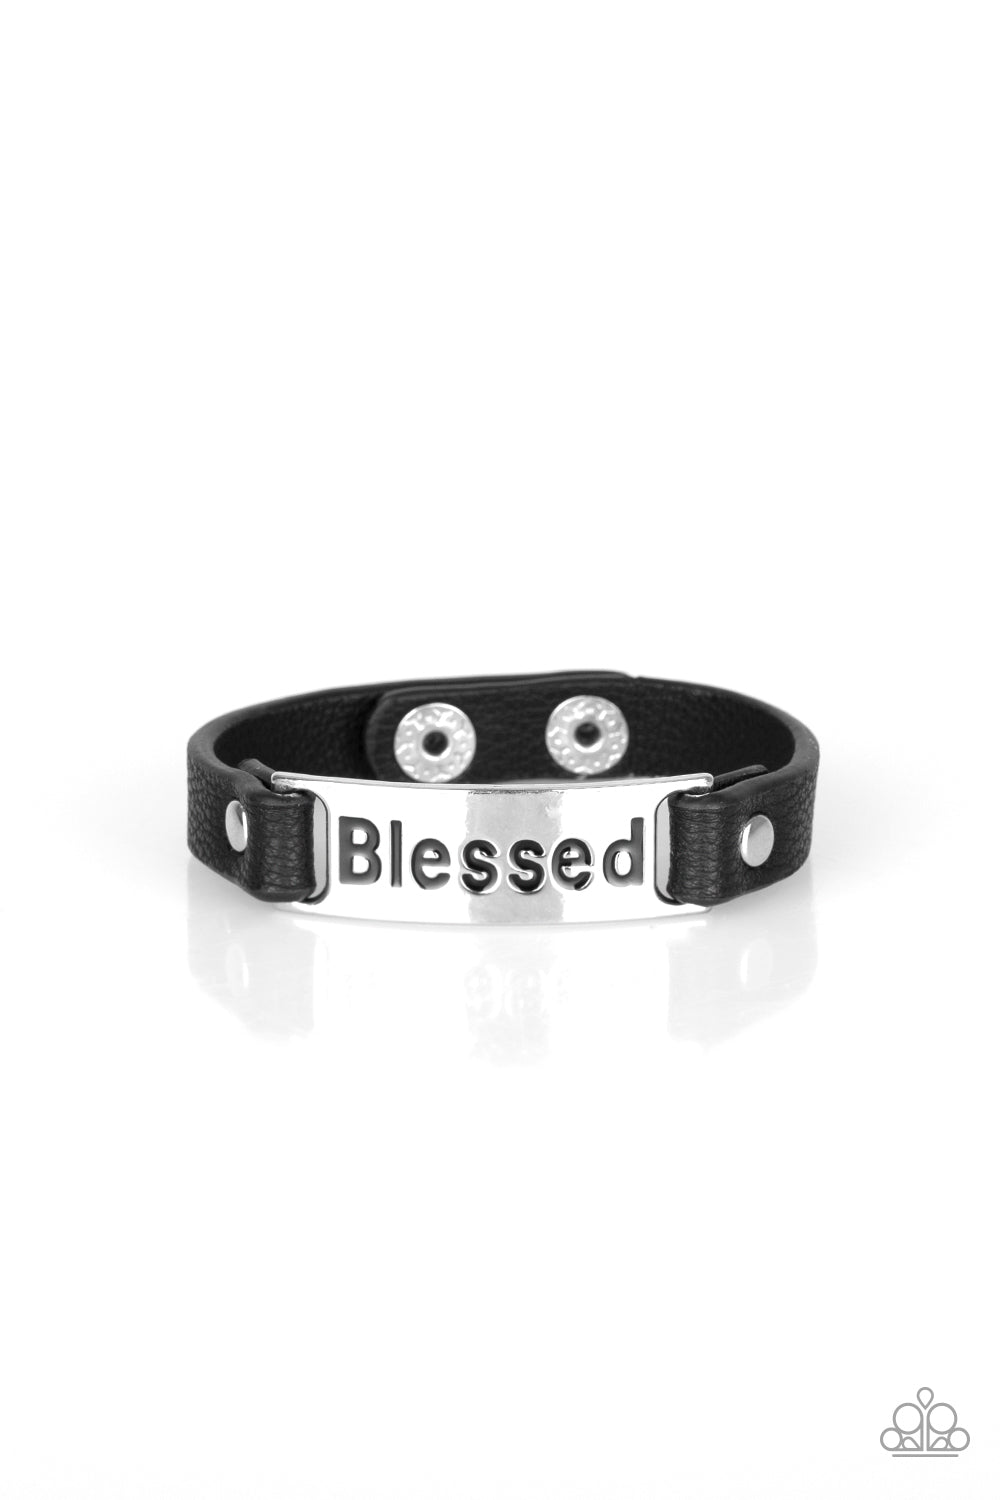 Count Your Blessings - Black